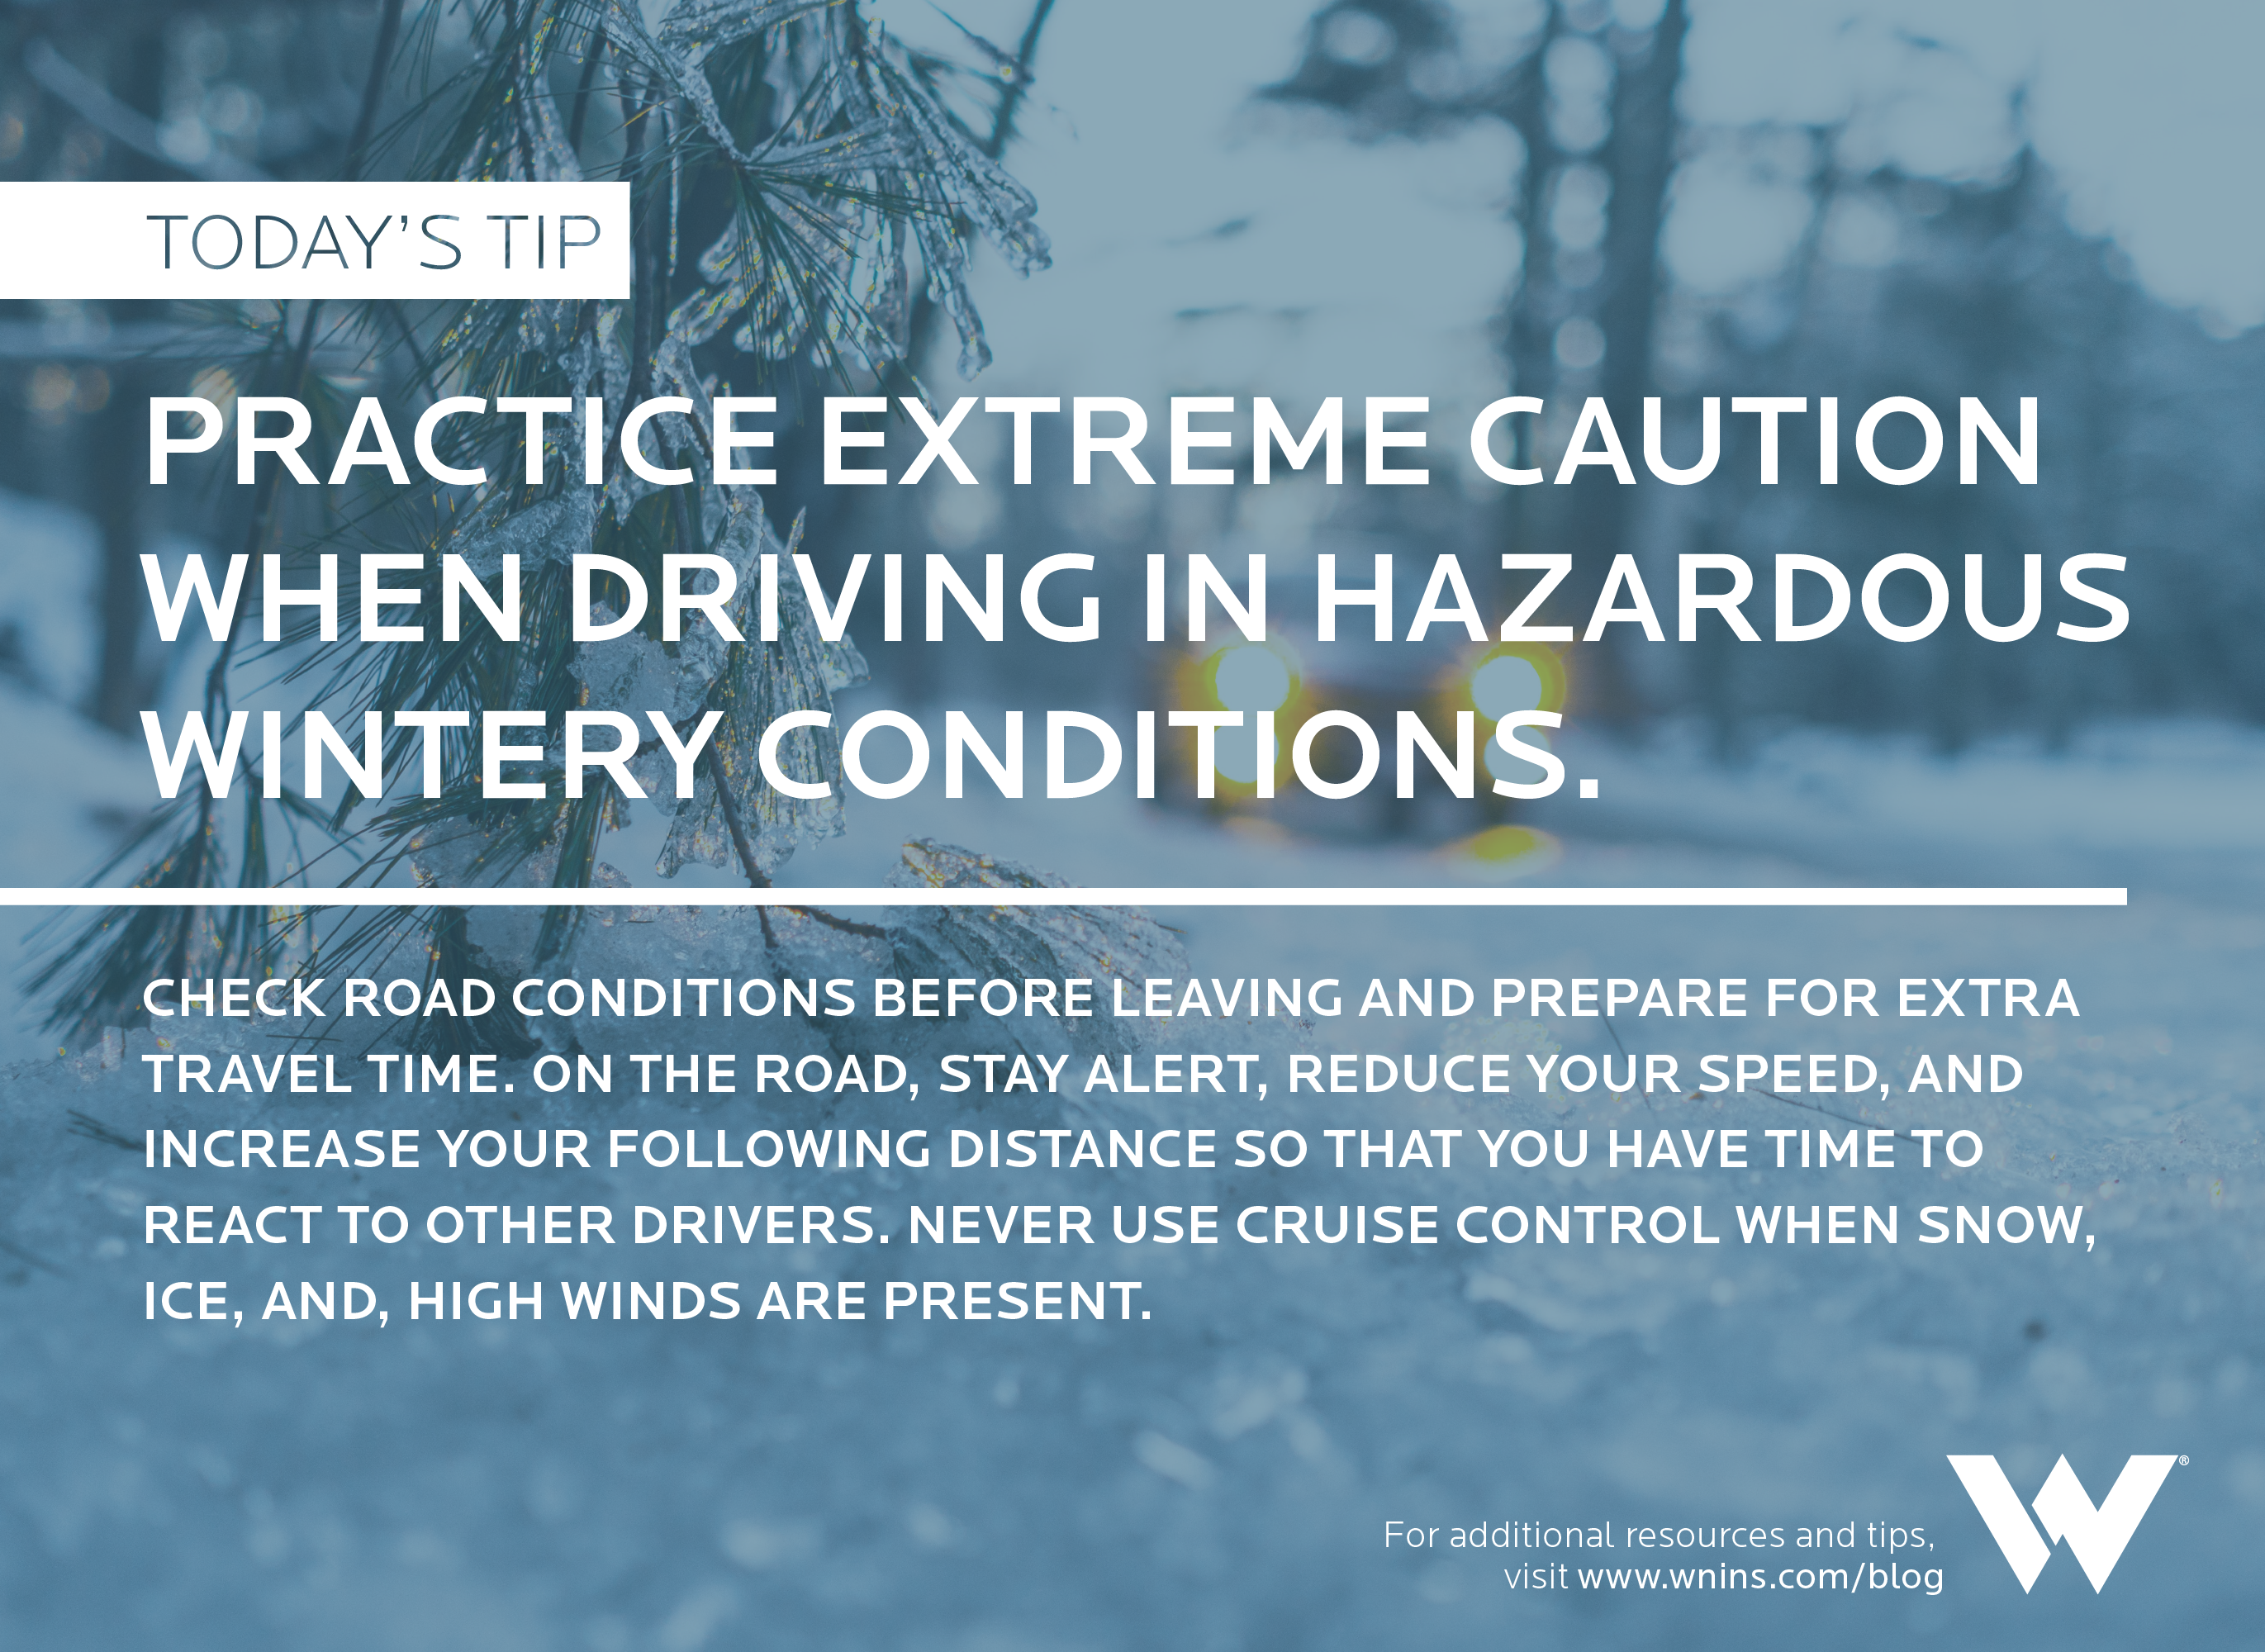 A social media graphic with a tip for driving safely on winter roads.